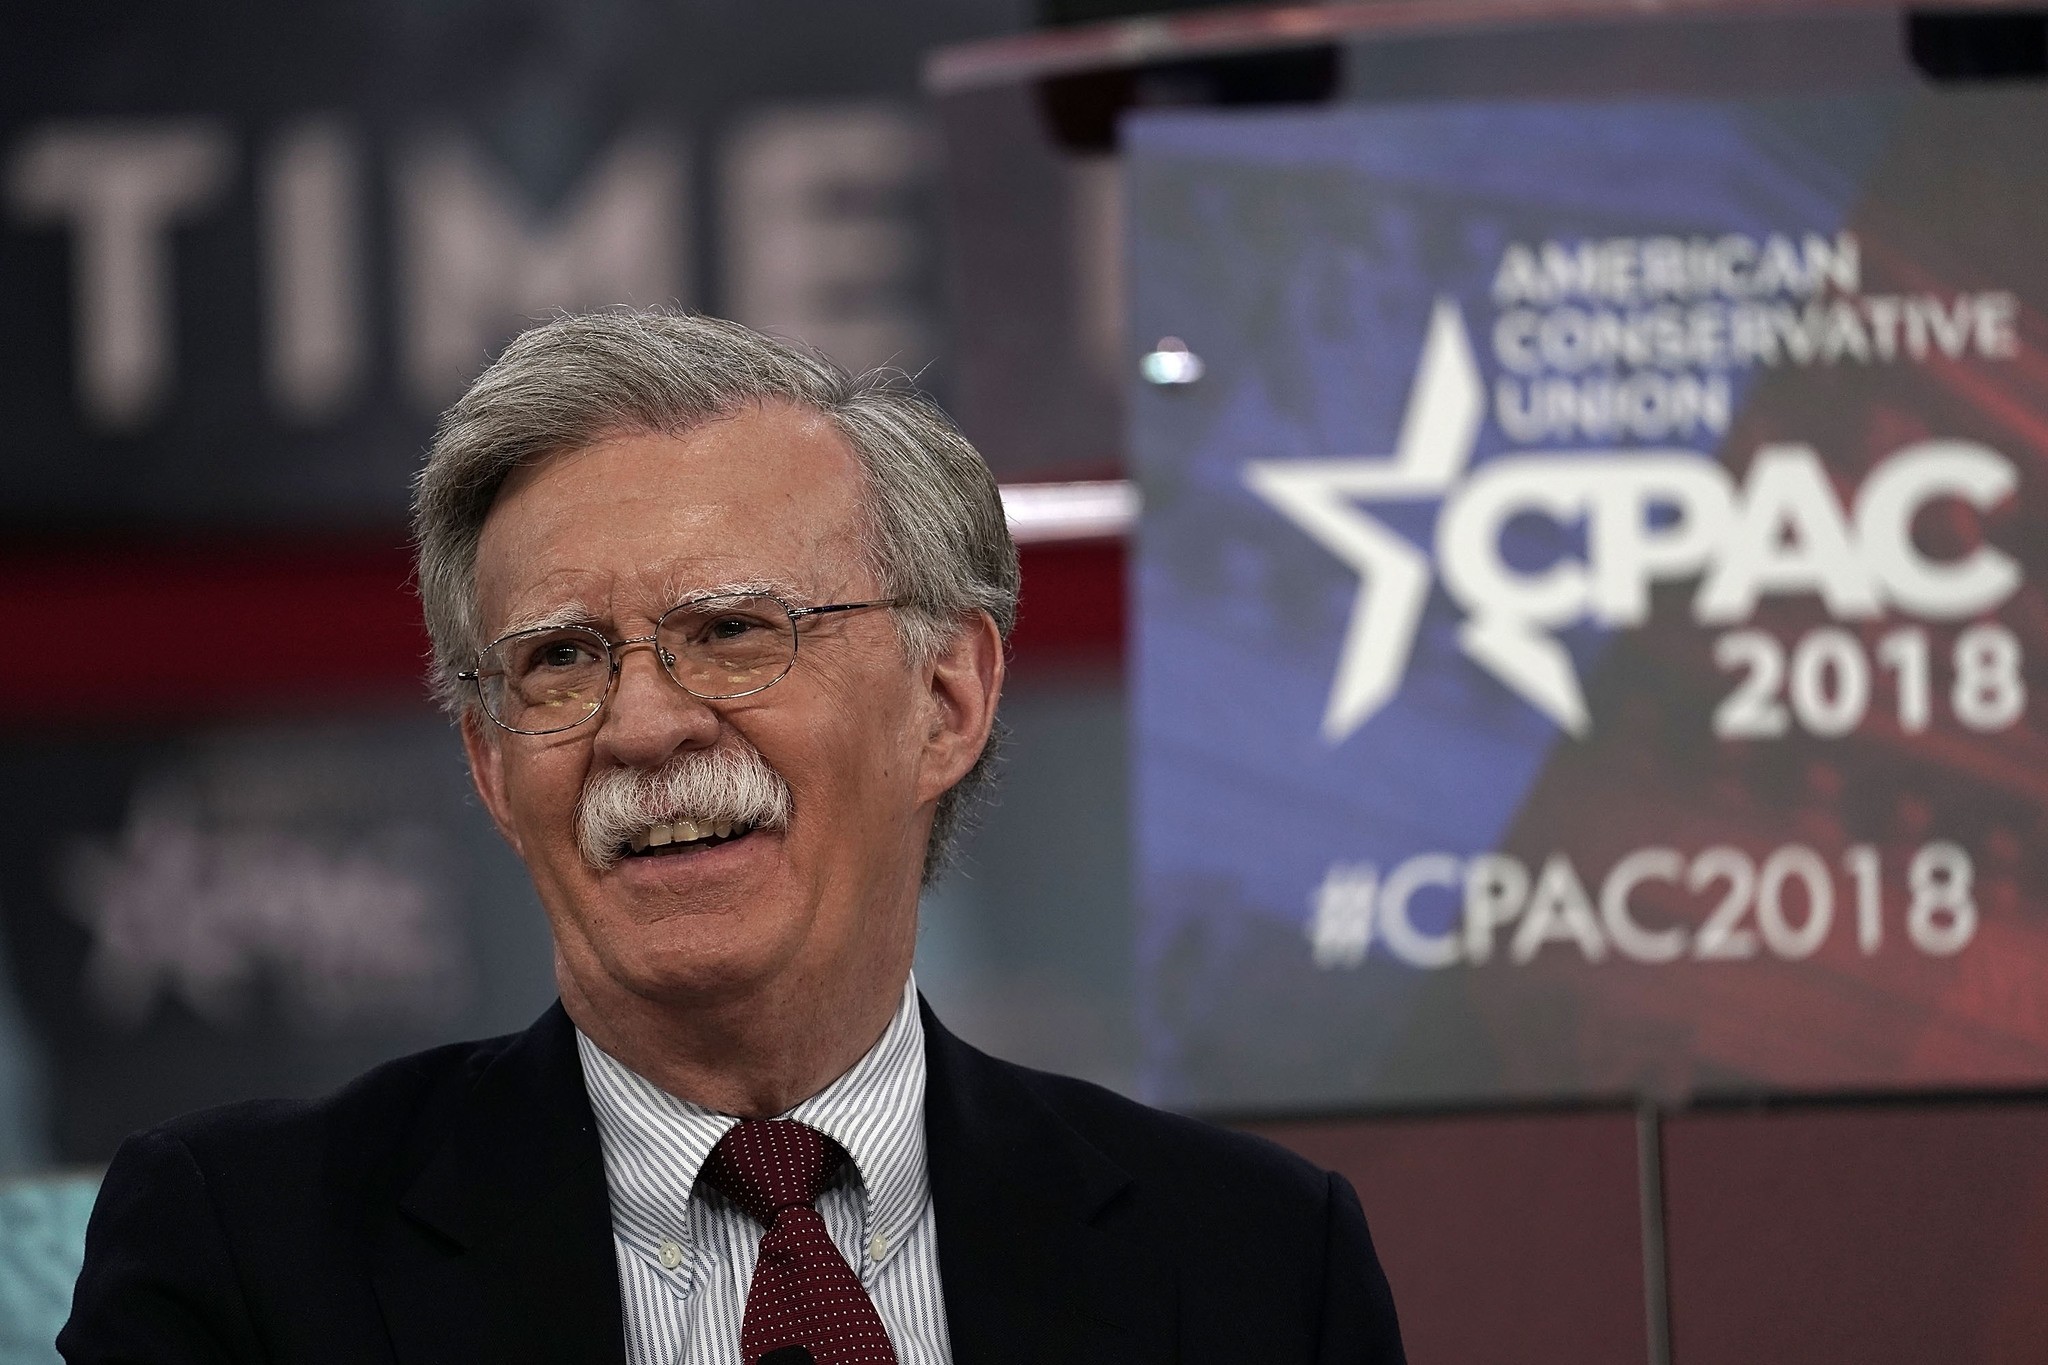 This file photo taken on February 22, 2018 shows former US Ambassador to the United Nations John Bolton speaking during CPAC 2018 in National Harbor, Maryland. (AFP Photo)